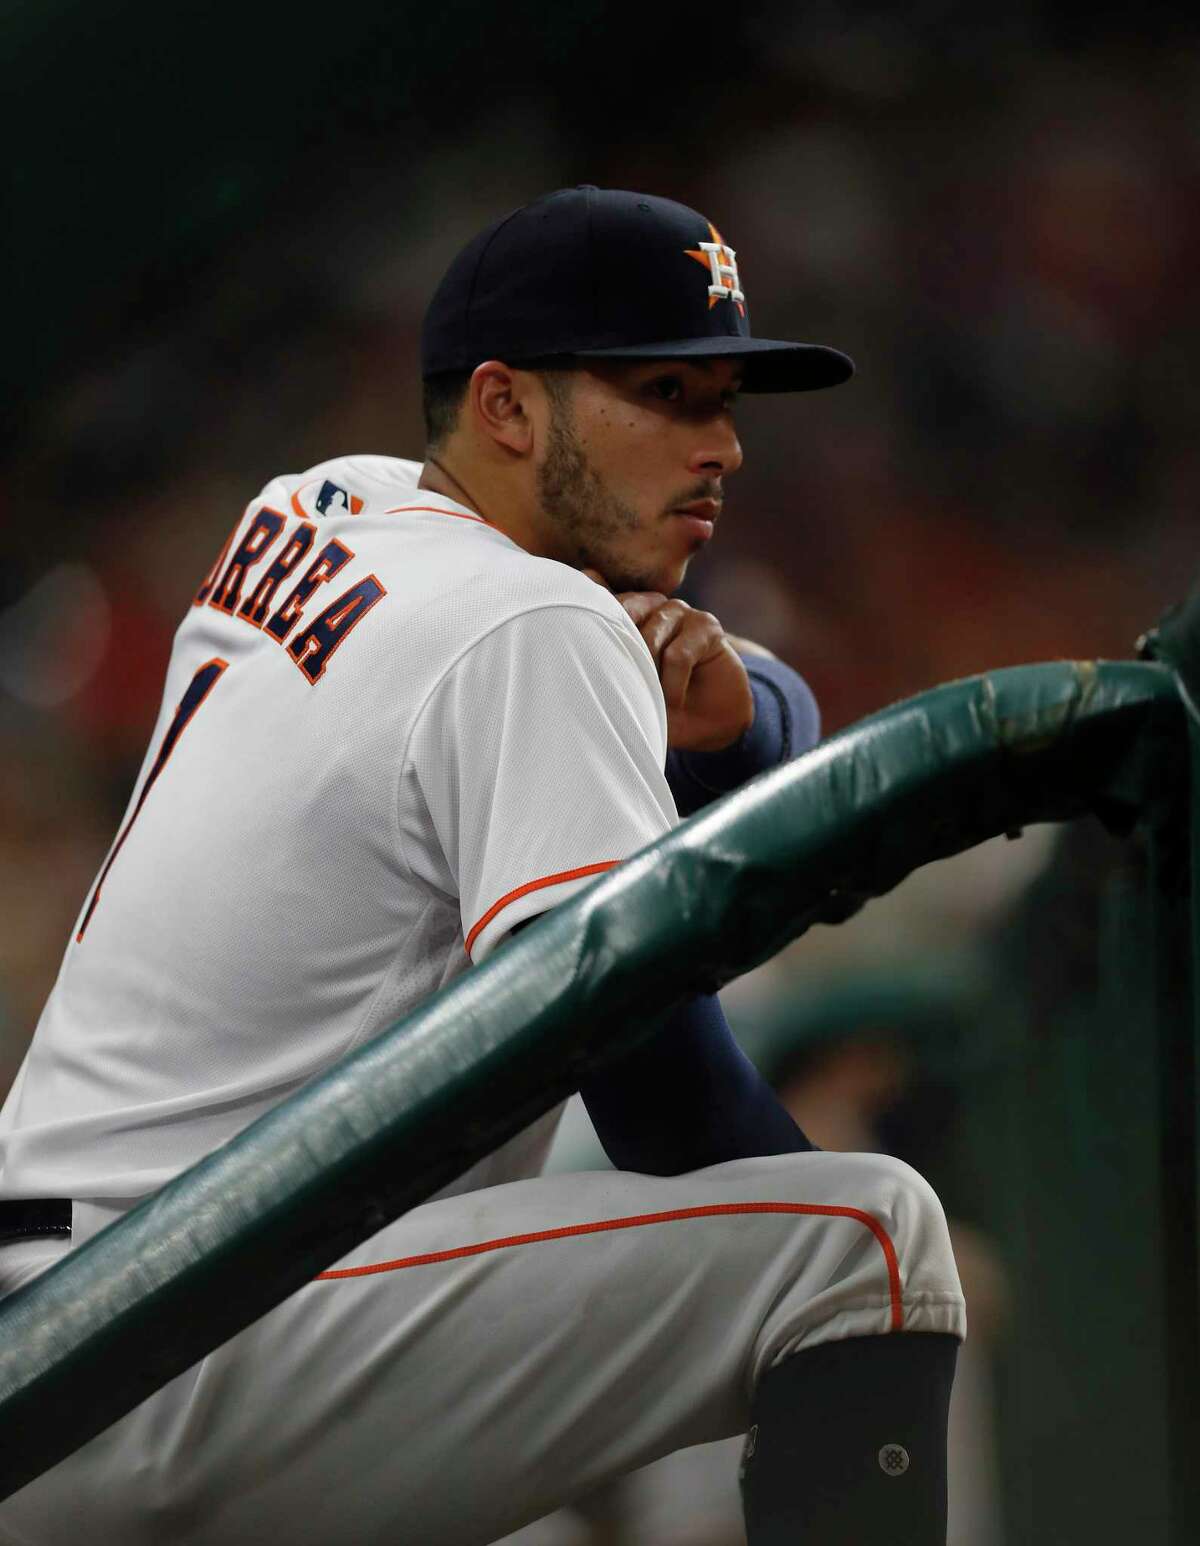 PHOTOS: How the Astros have done when Carlos Correa doesn't play Houston Astros shortstop Carlos Correa (1) in the dugout with a bruised hand during the third inning of an MLB baseball game at Minute Maid Park, 2017, in Houston. Browse through the photos to see how the Astros have done without Carlos Correa in the lineup.